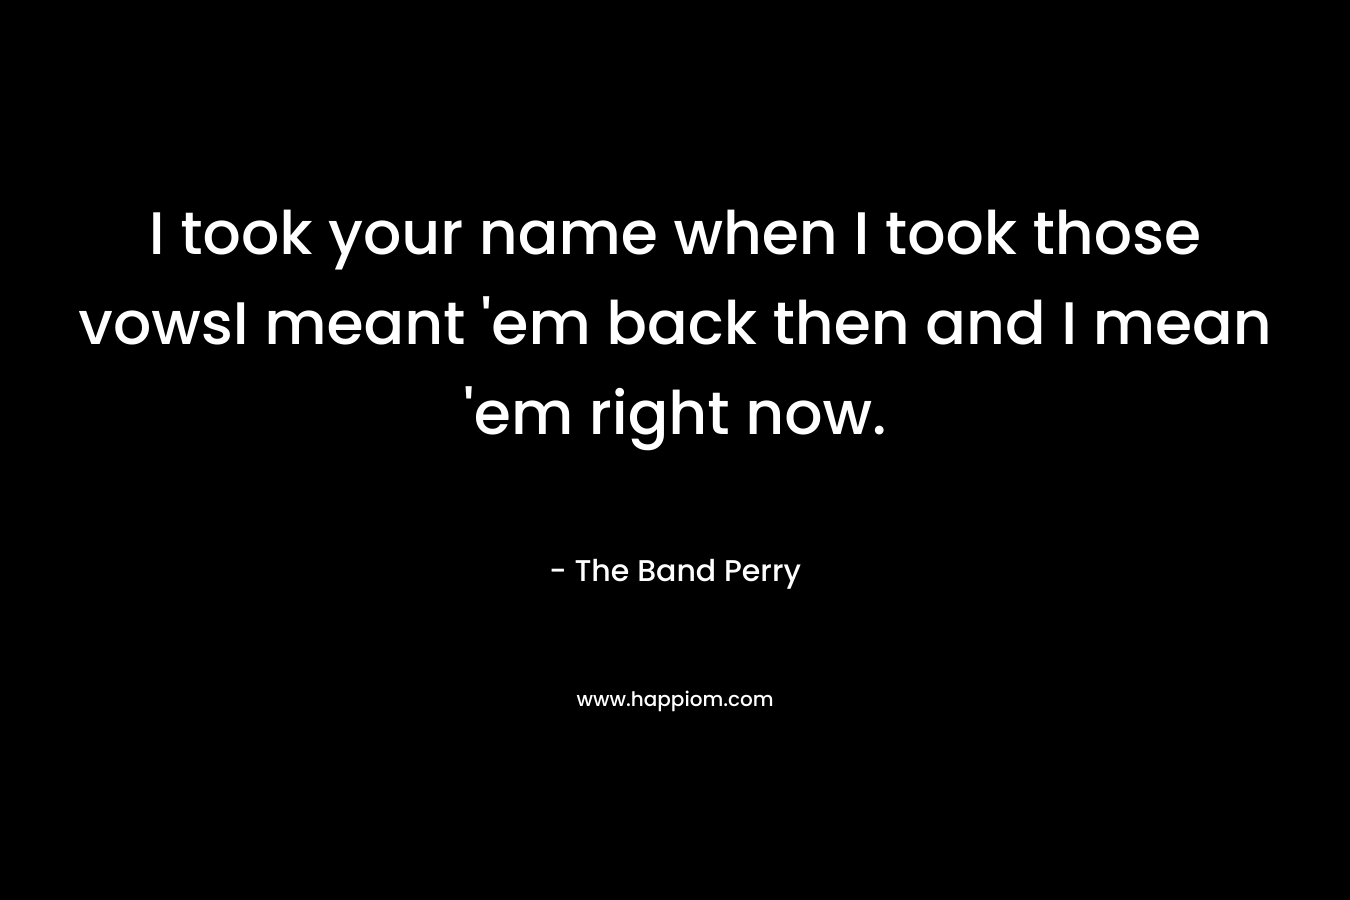 I took your name when I took those vowsI meant ’em back then and I mean ’em right now. – The Band Perry